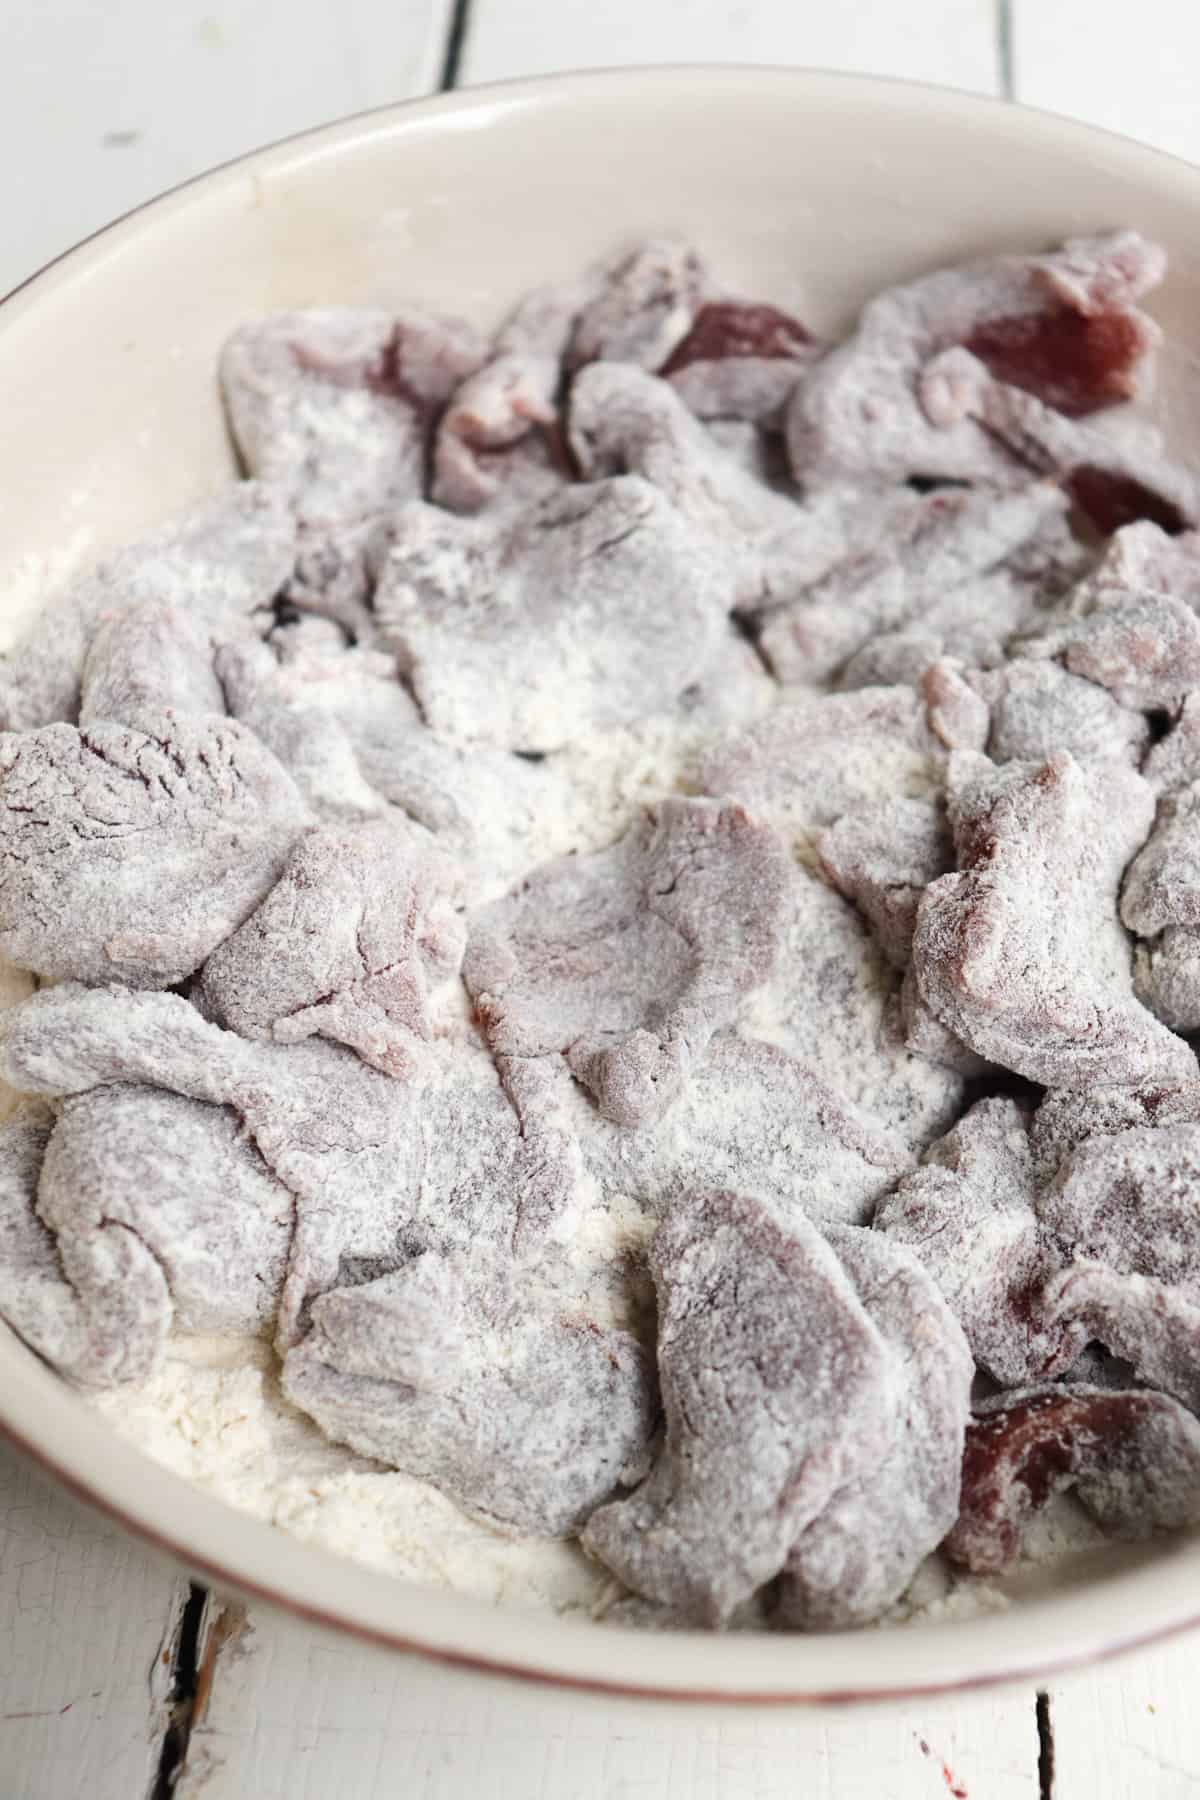 venison slices coated in flour.